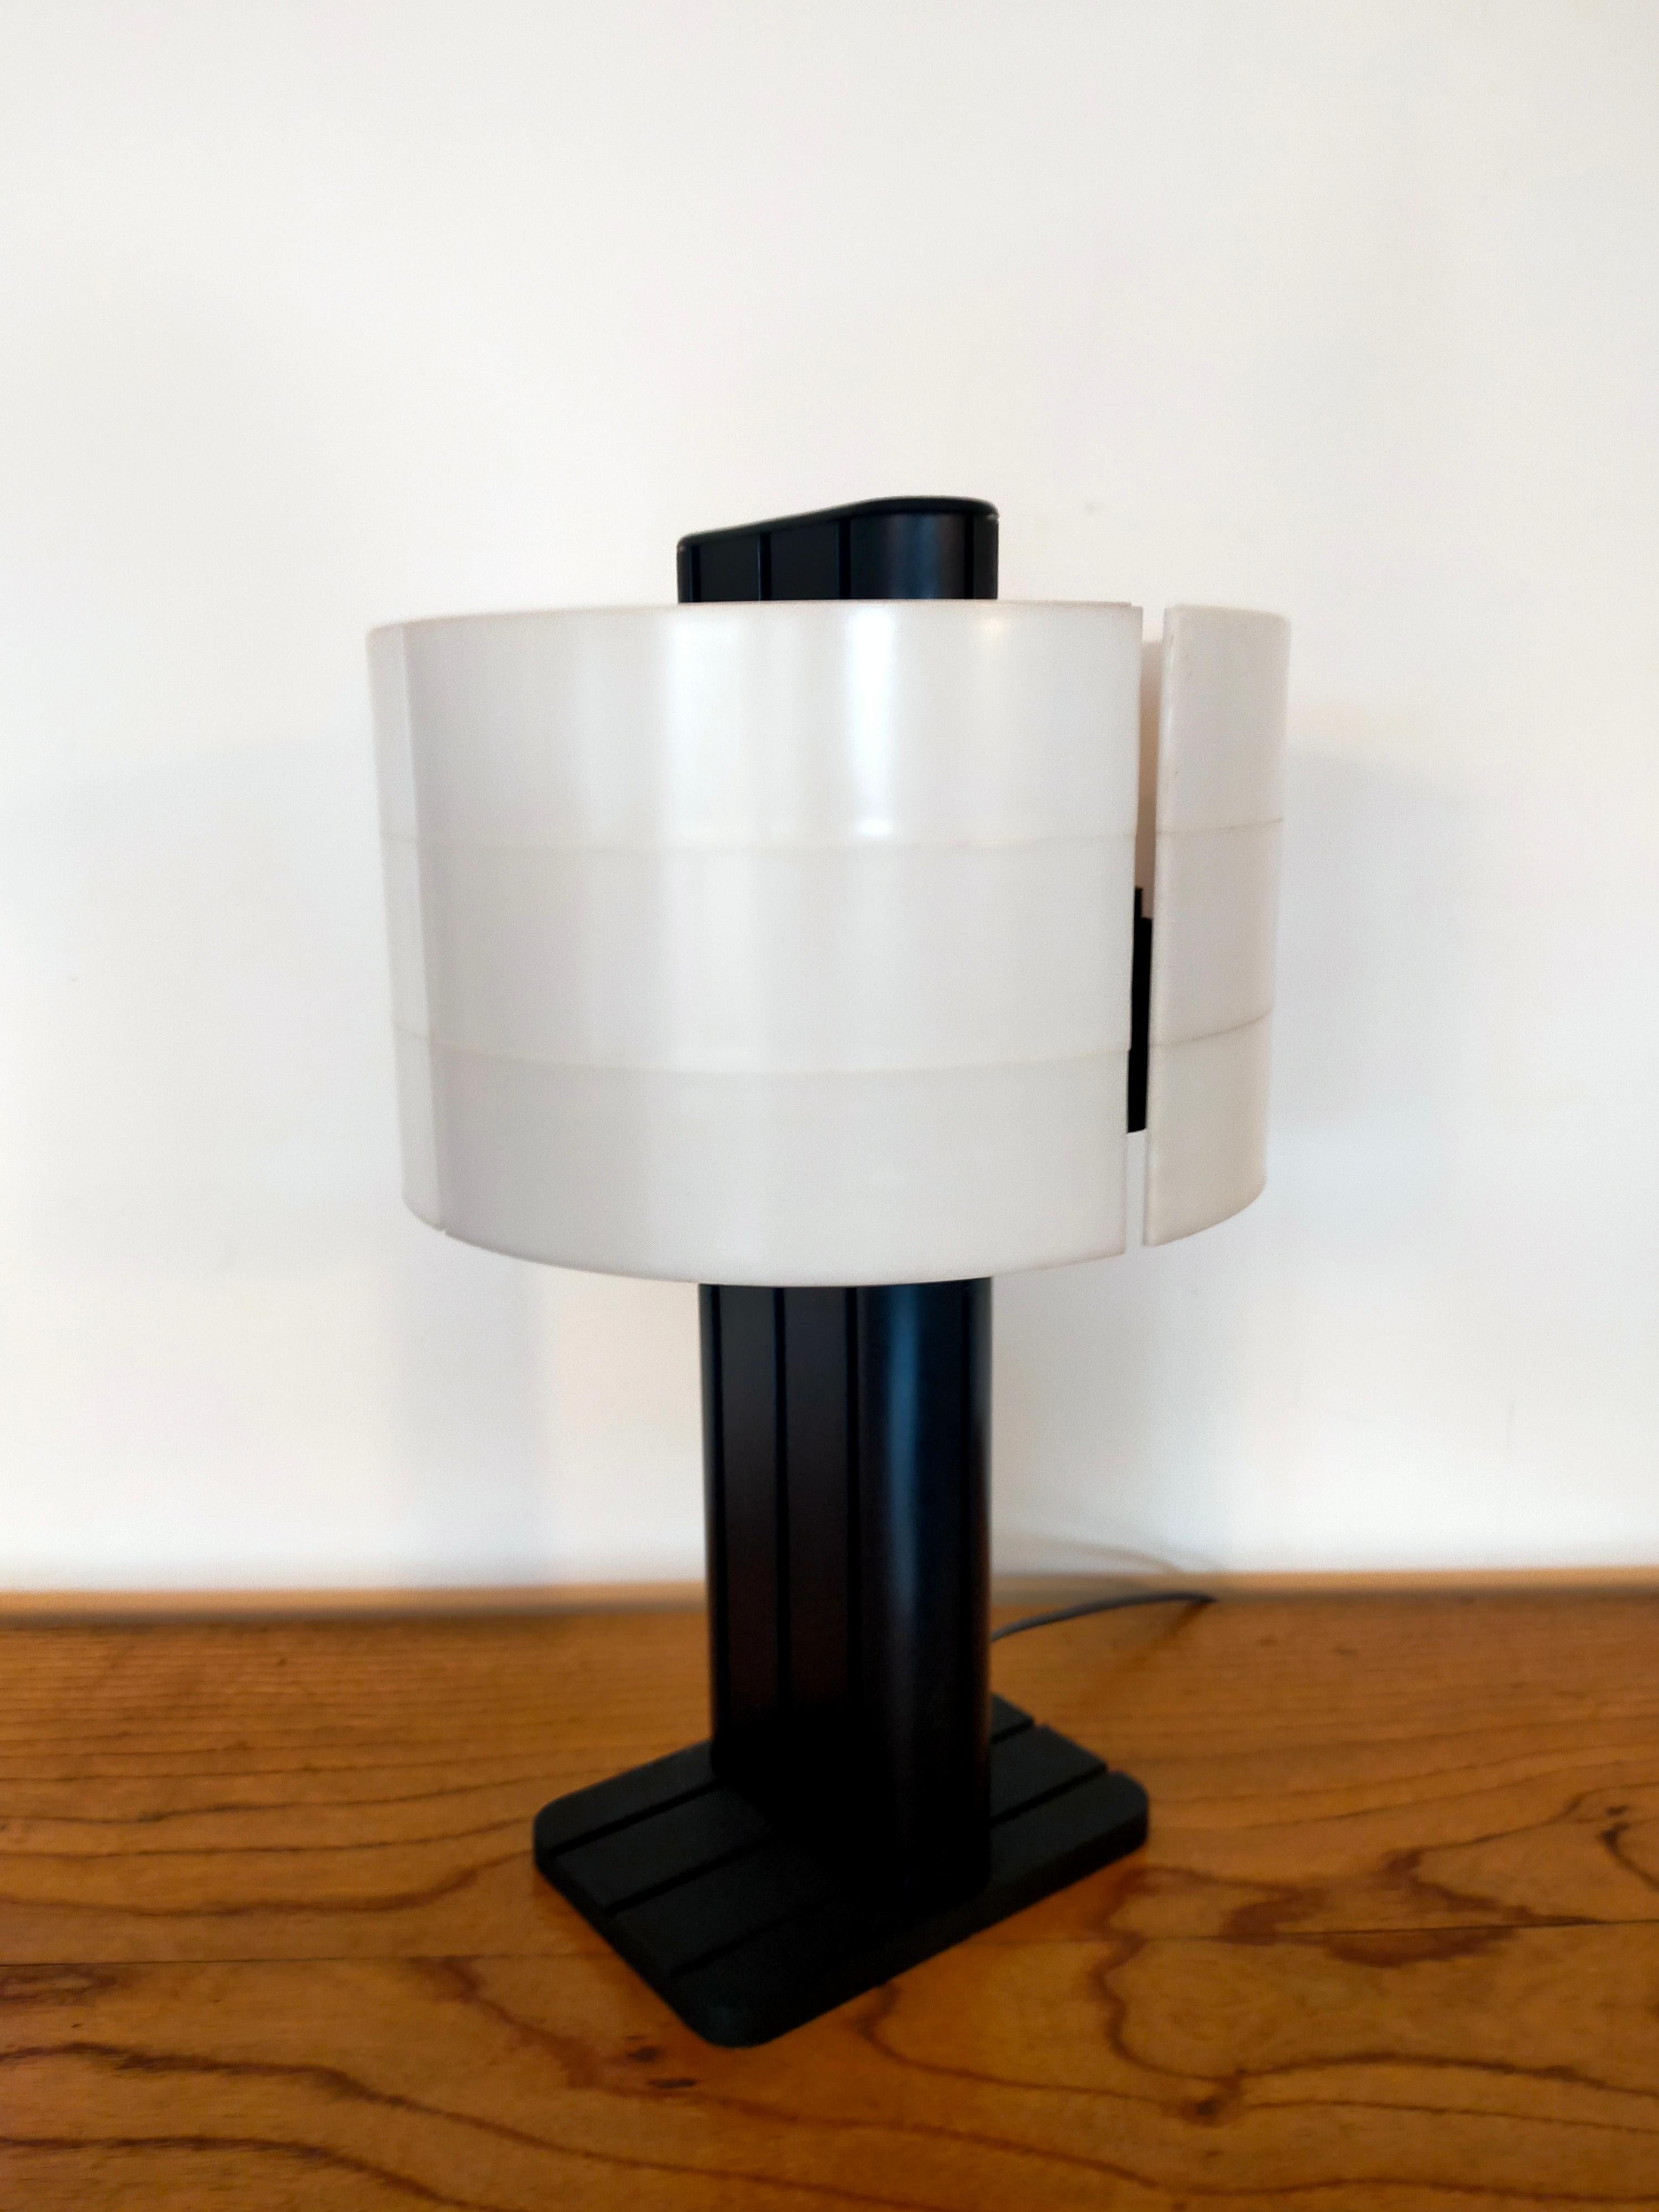 Black an white strigam desk lamp by Jean-Pierre Vitrac (circa 1980) by Verre Lumiere Editor
Black lacquered cast aluminum base, acrylic shade
Measures: 15.94 H x 9.45 inches
40.5 H x 24 cm.